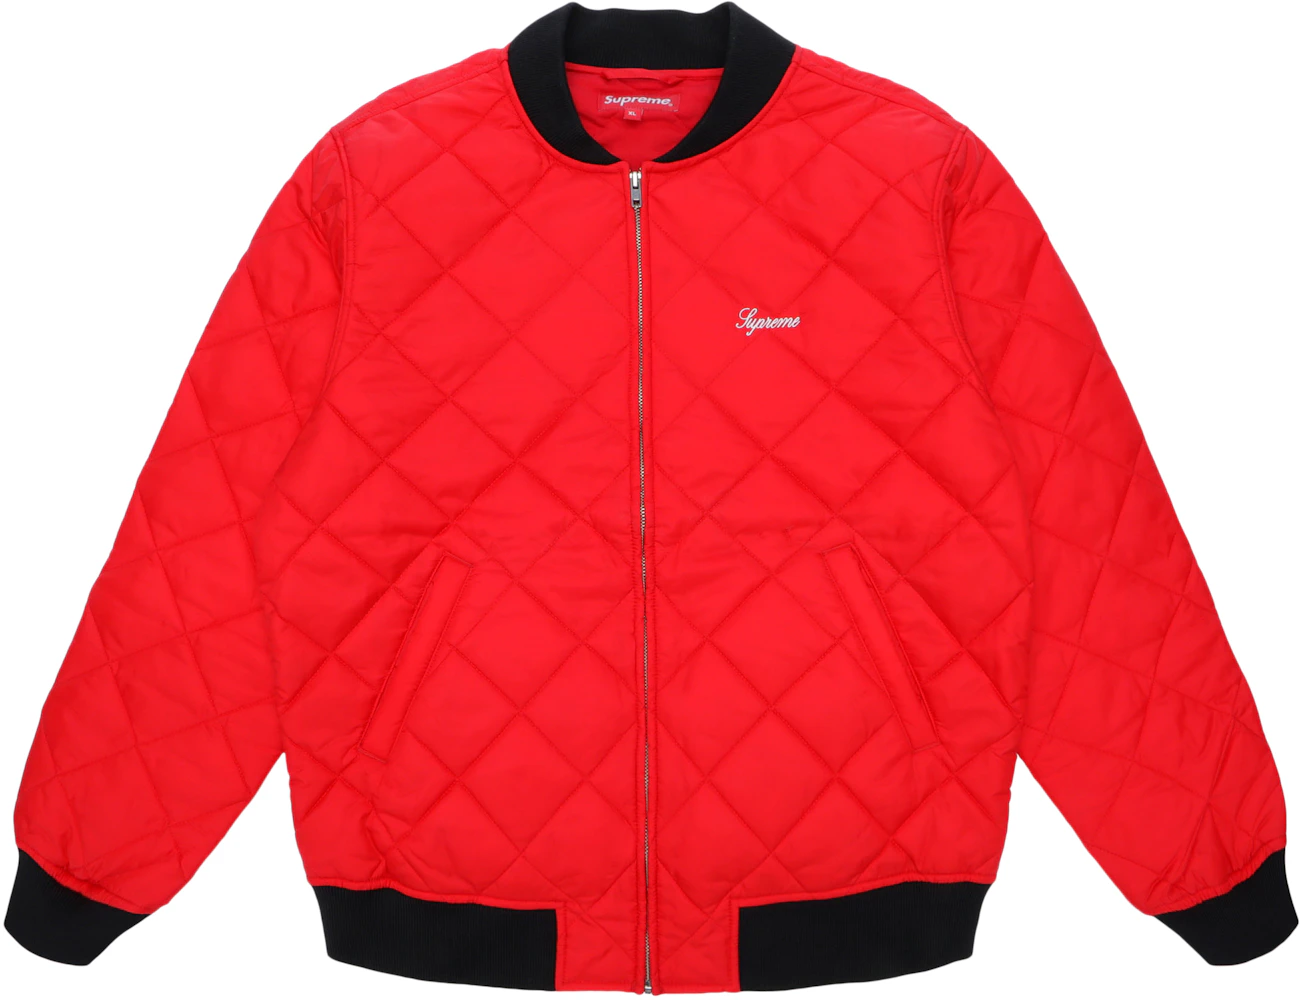 PATCH BOMBER JACKET - Intense red